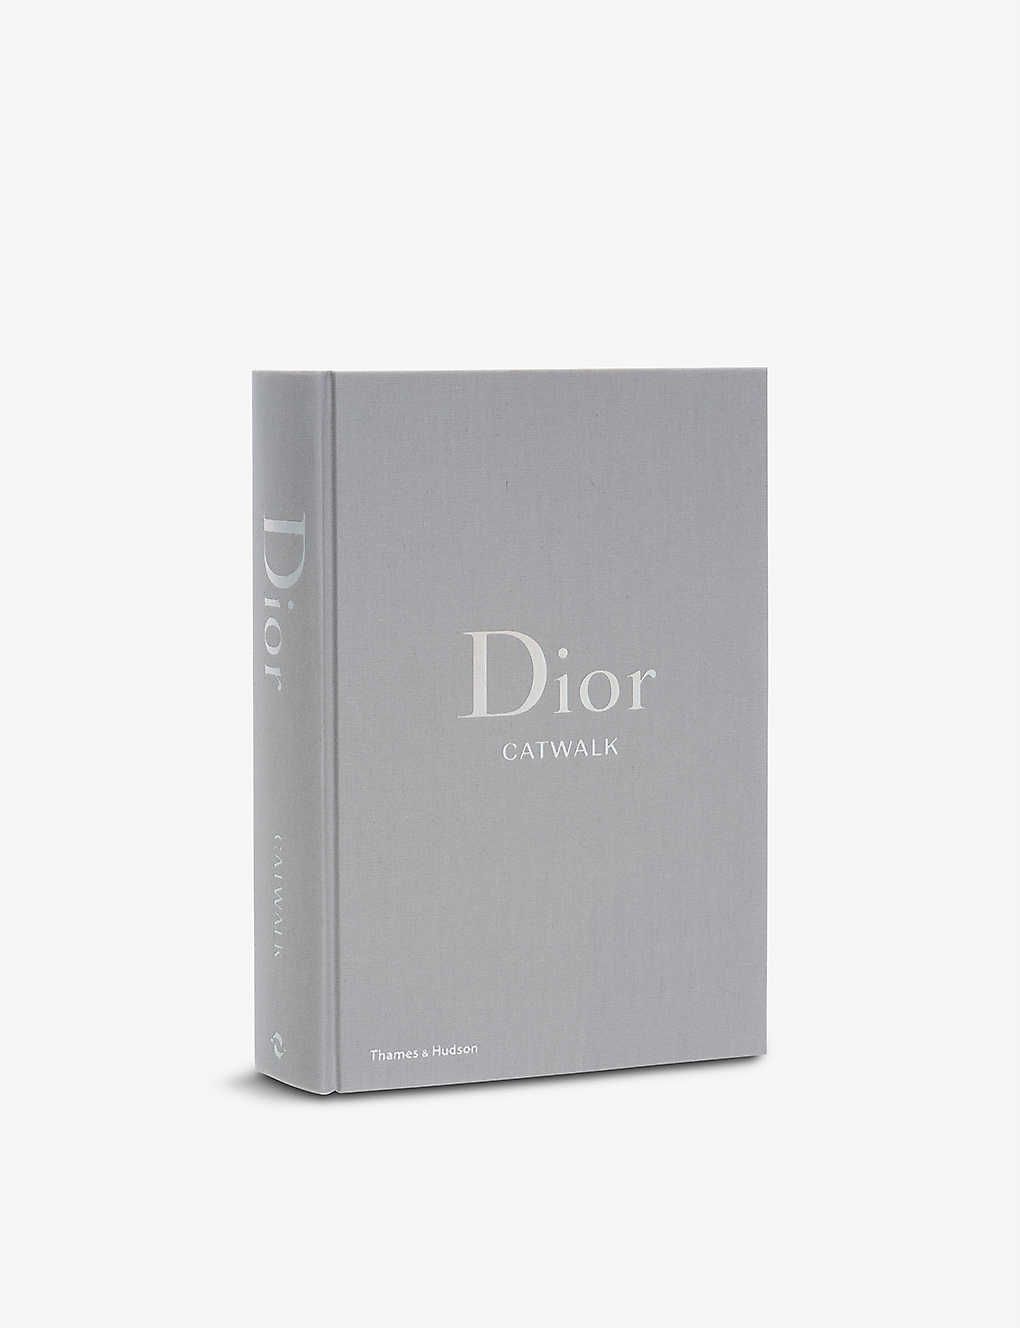 Dior Catwalk: The Complete Collections book | Selfridges